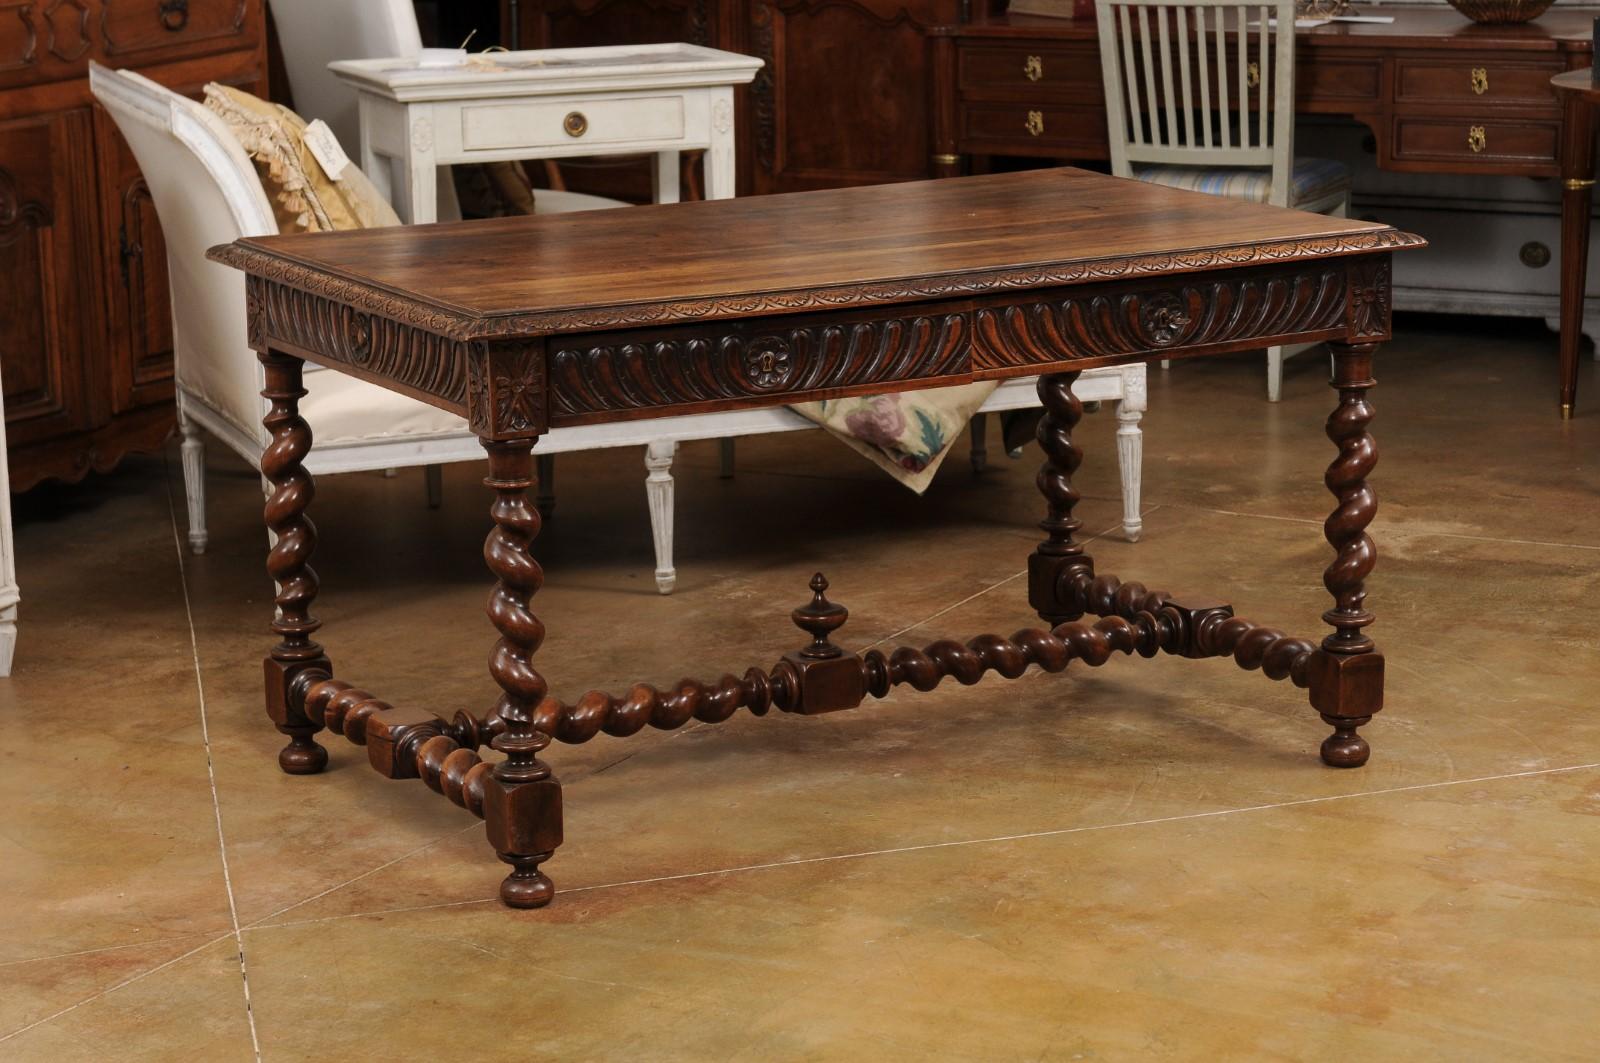 A French Louis XIII style walnut desk from the 19th century, with carved apron, two drawers and barley twist base. Created in France during the 19th century, this walnut desk showcases the stylistic characteristics of the Louis XIII era. The desk